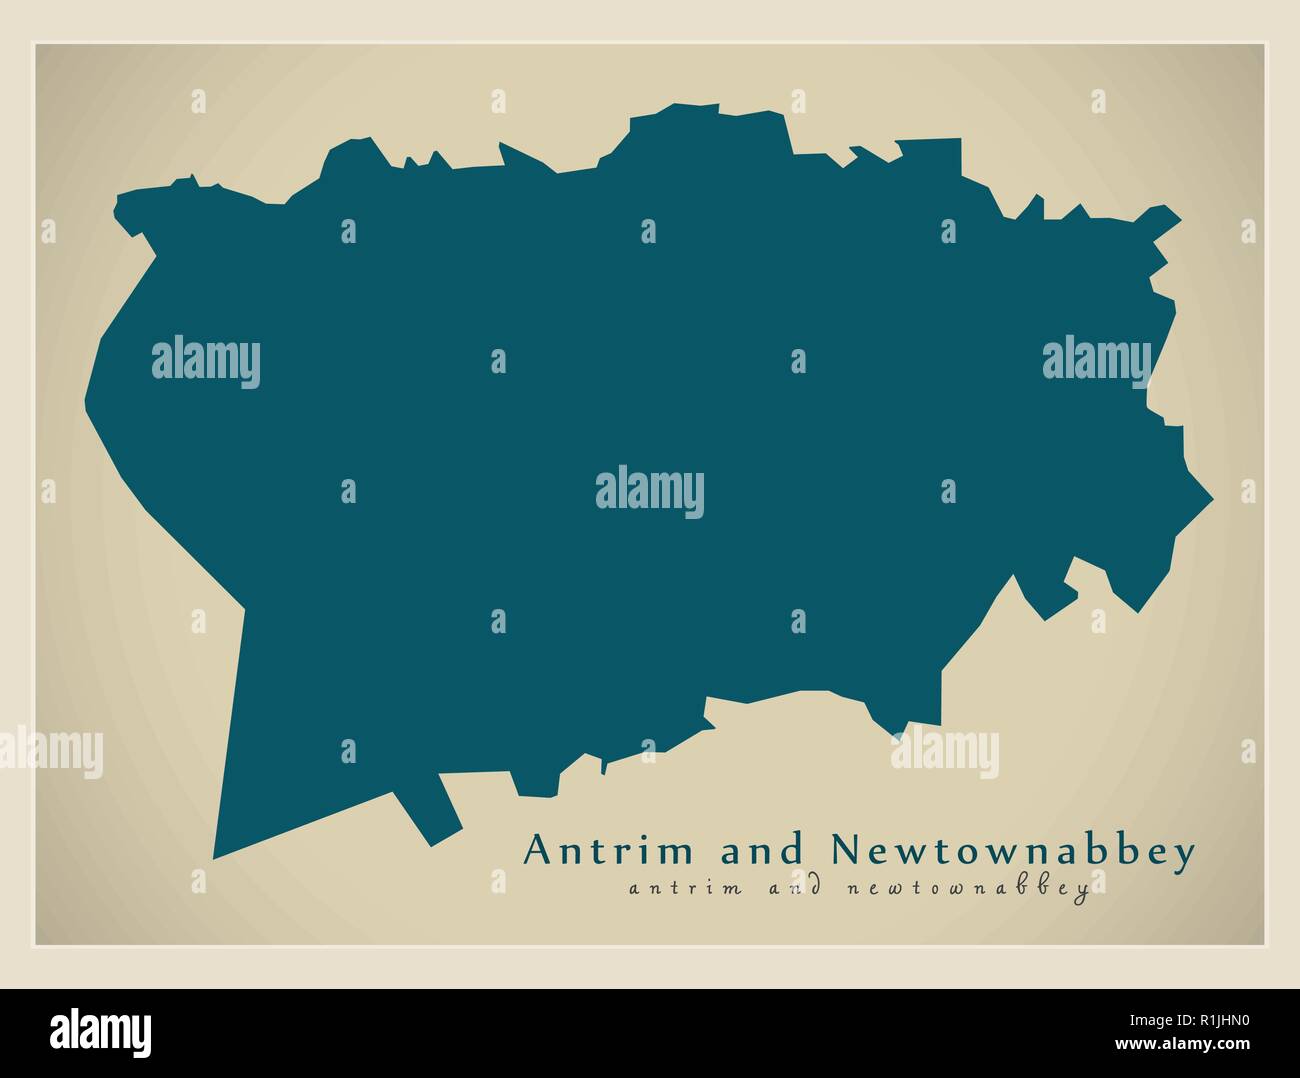 Antrim and Newtownabbey district map of Northern Ireland Stock Vector